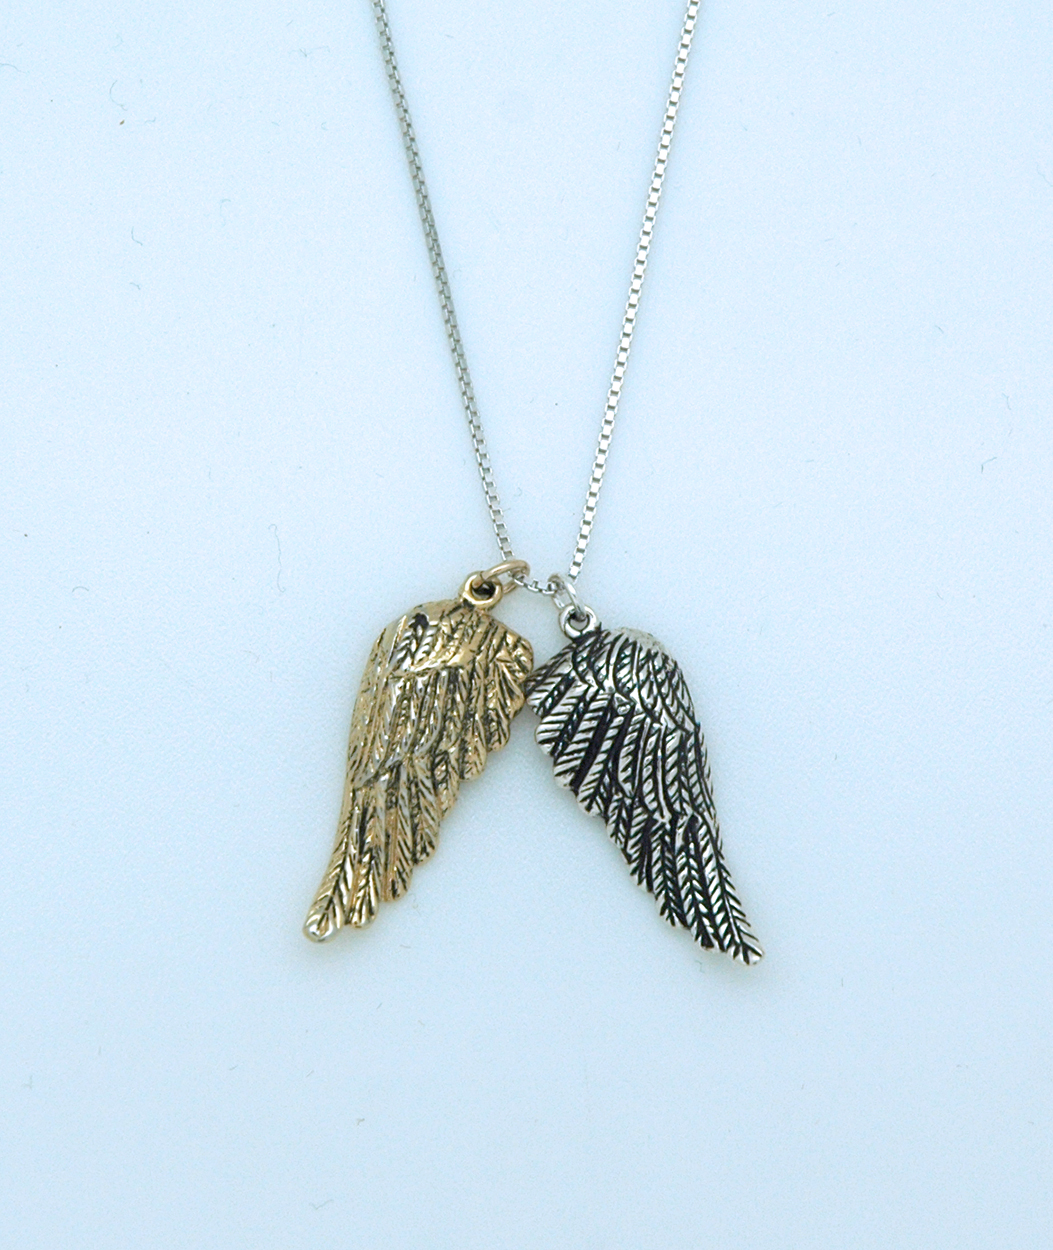 SSN100 - Sterling Silver and Gold Wings Necklace, 16 in. Sterling Silver Chain